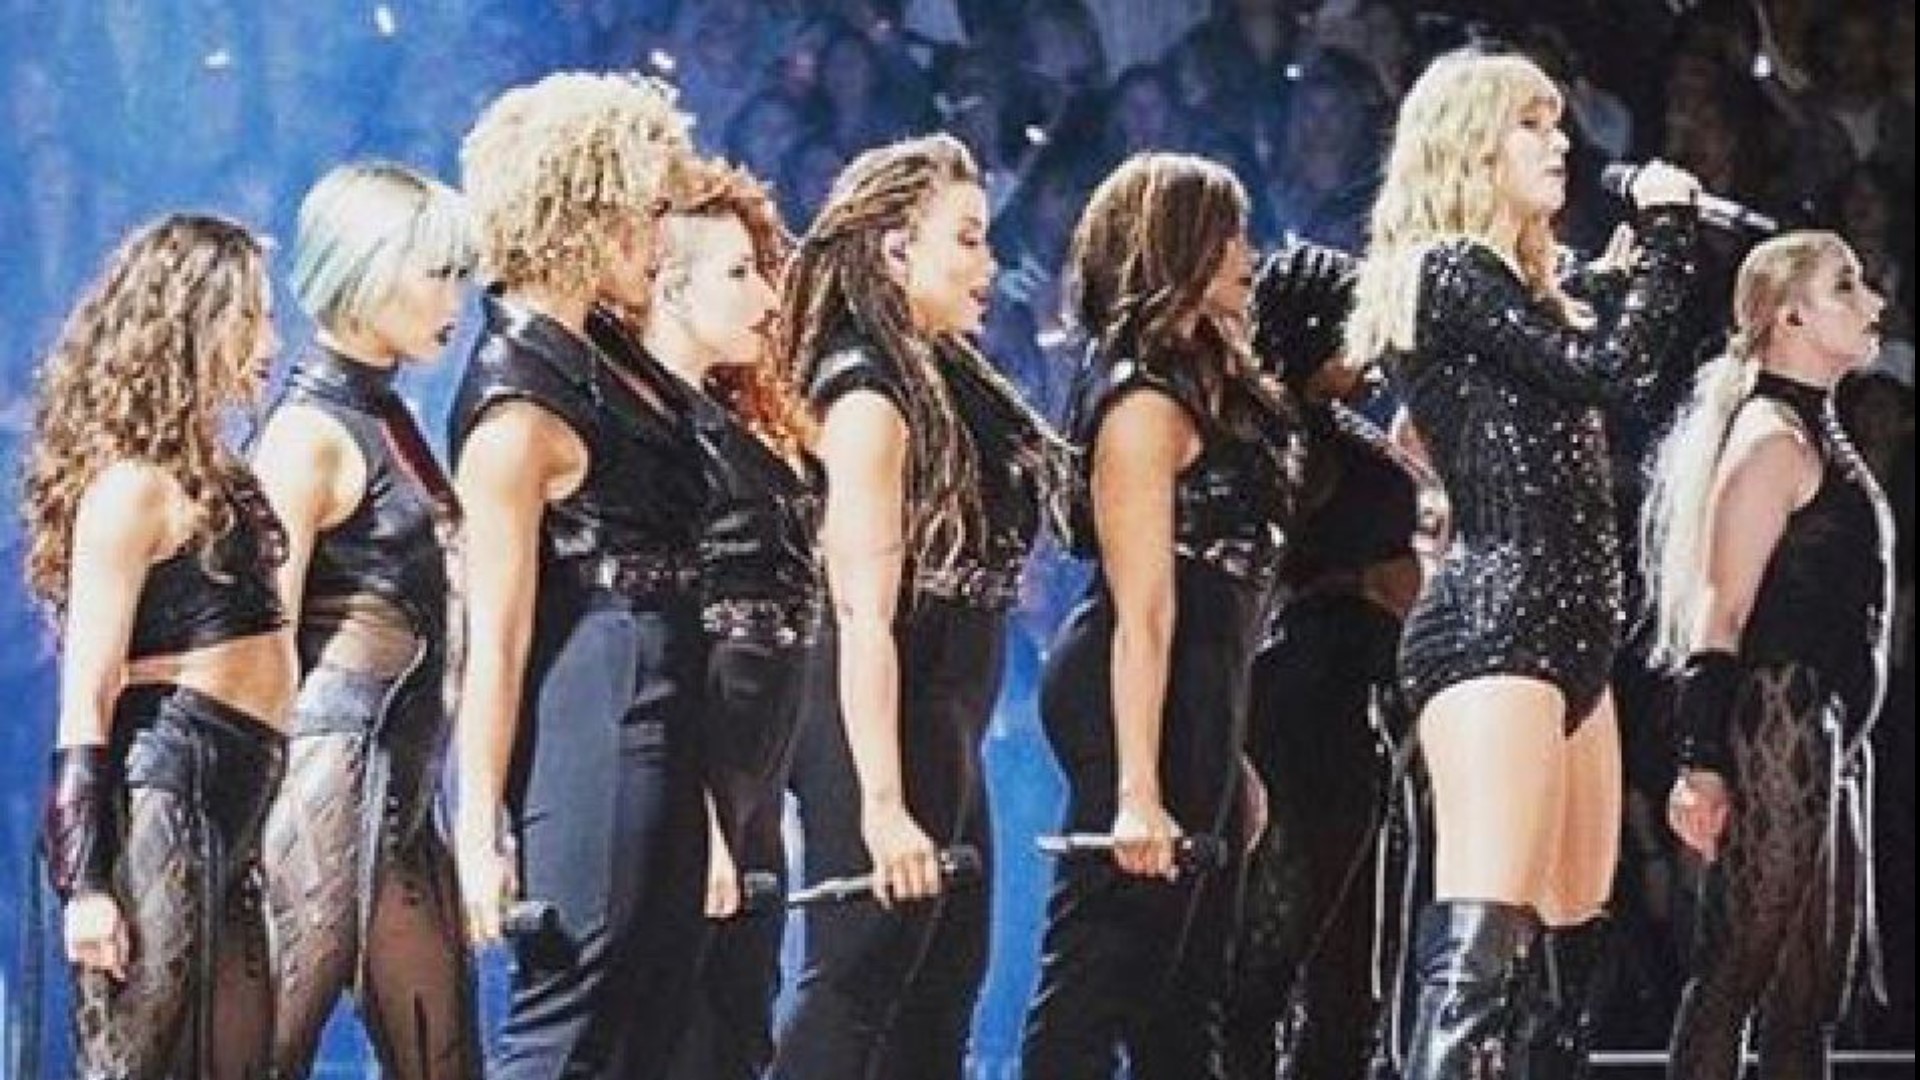 Eliotte Henderson, a San Antonio native and Reagan High School graduate, finds big success touring with Taylor Swift as a backup singer and dancer. Part 2 of 2.